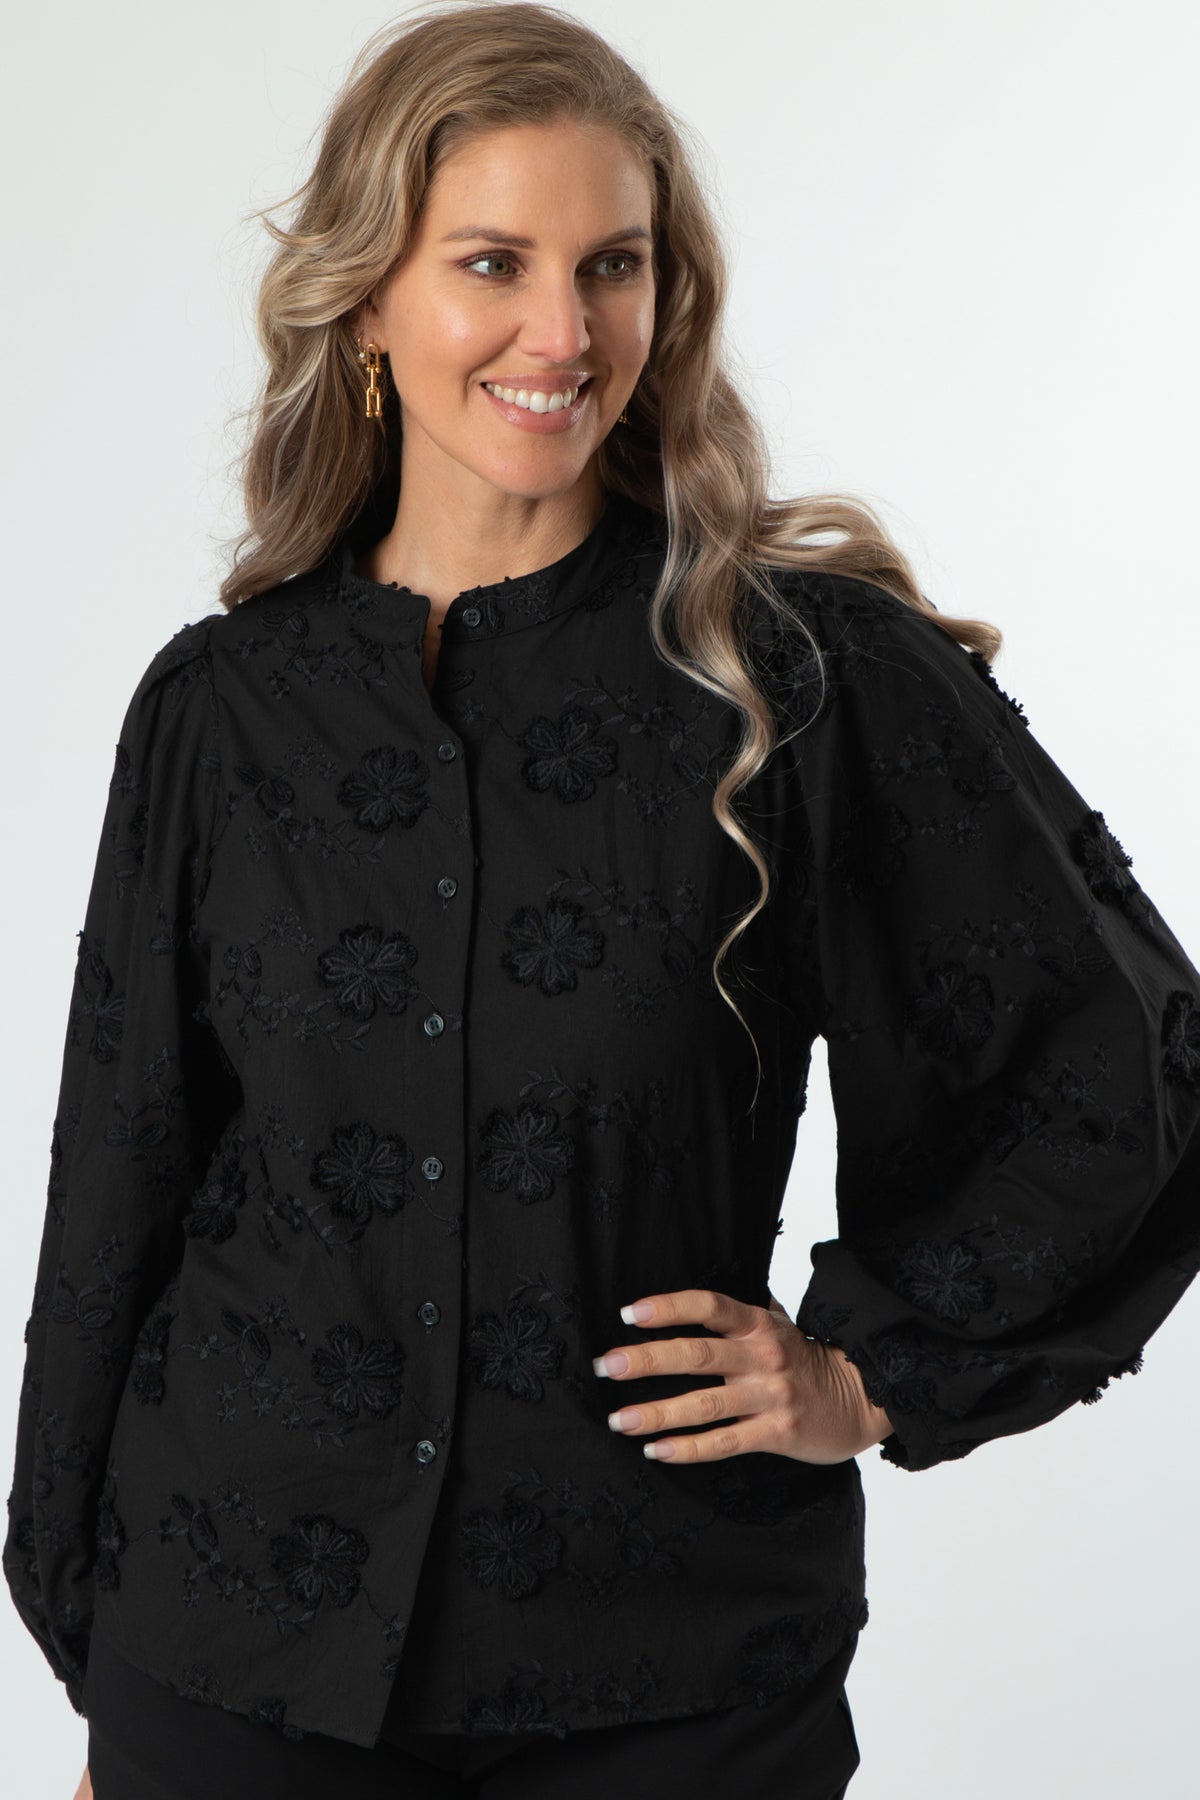 Greer Blouse Black - PREORDER DELIVERY EARLY APRIL